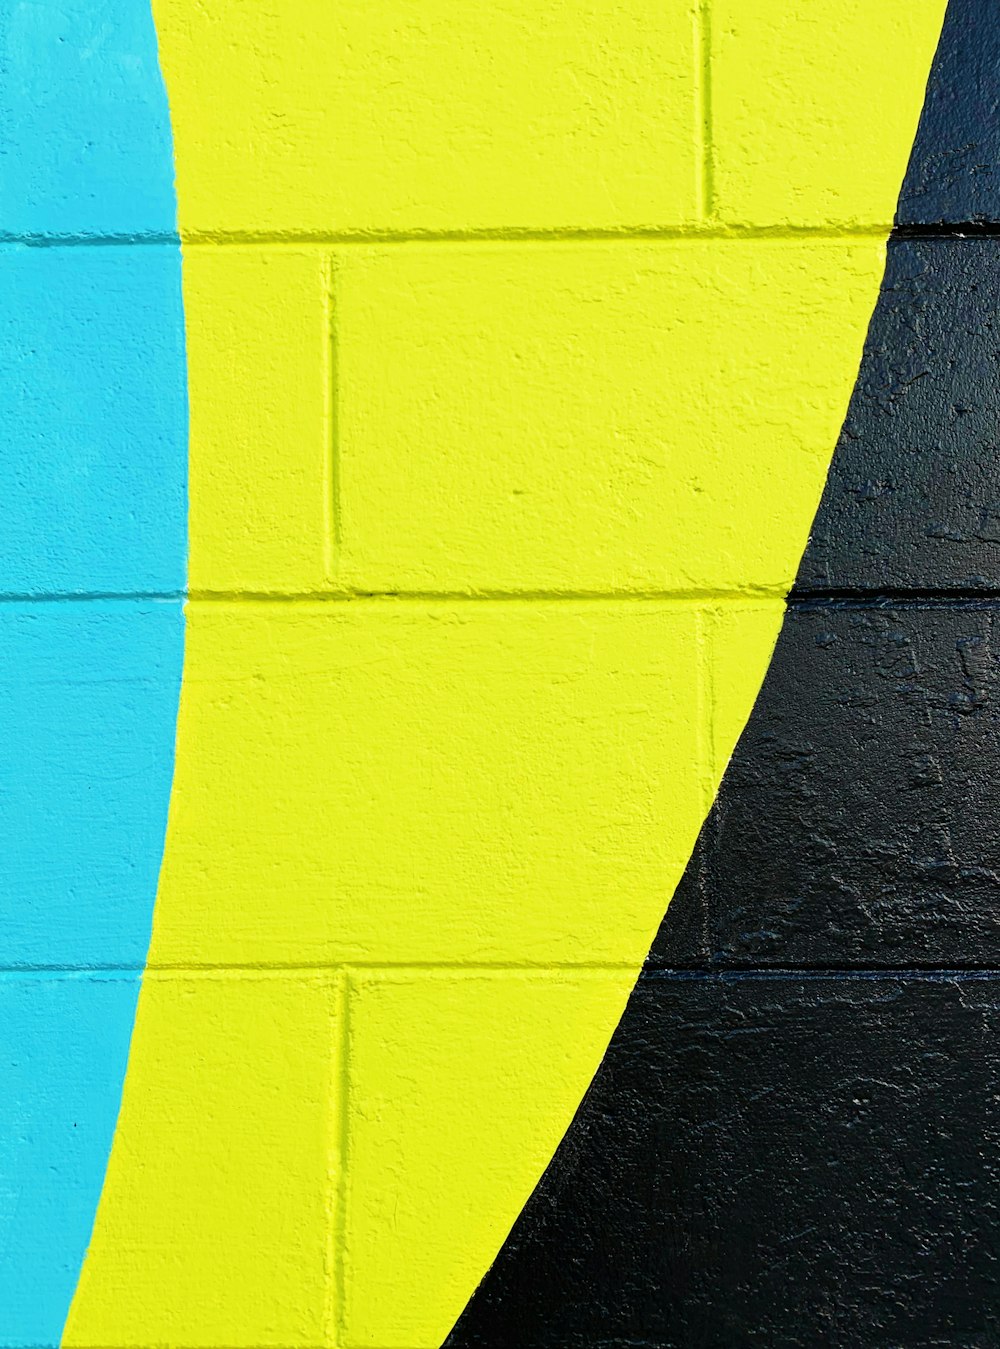 teal, yellow, and black painted wall